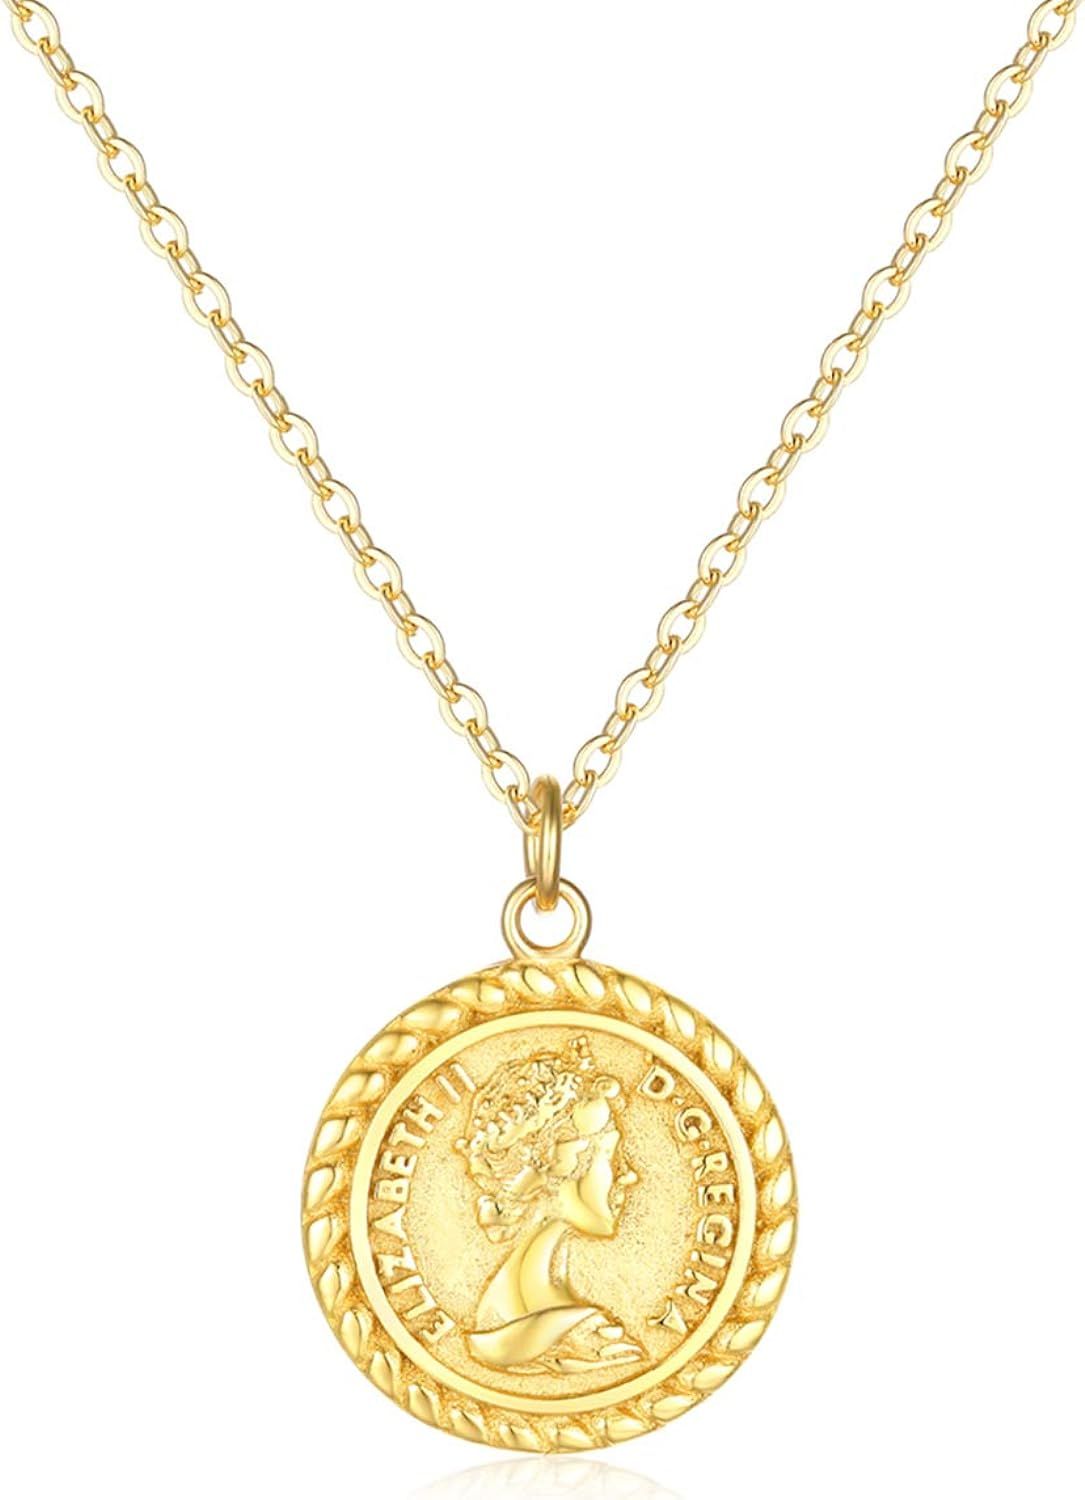 MEVECCO Carved Gold Coin Pendant Necklace for Women Girls Men,18K Gold Plated Dainty Minimalist Neck | Amazon (US)